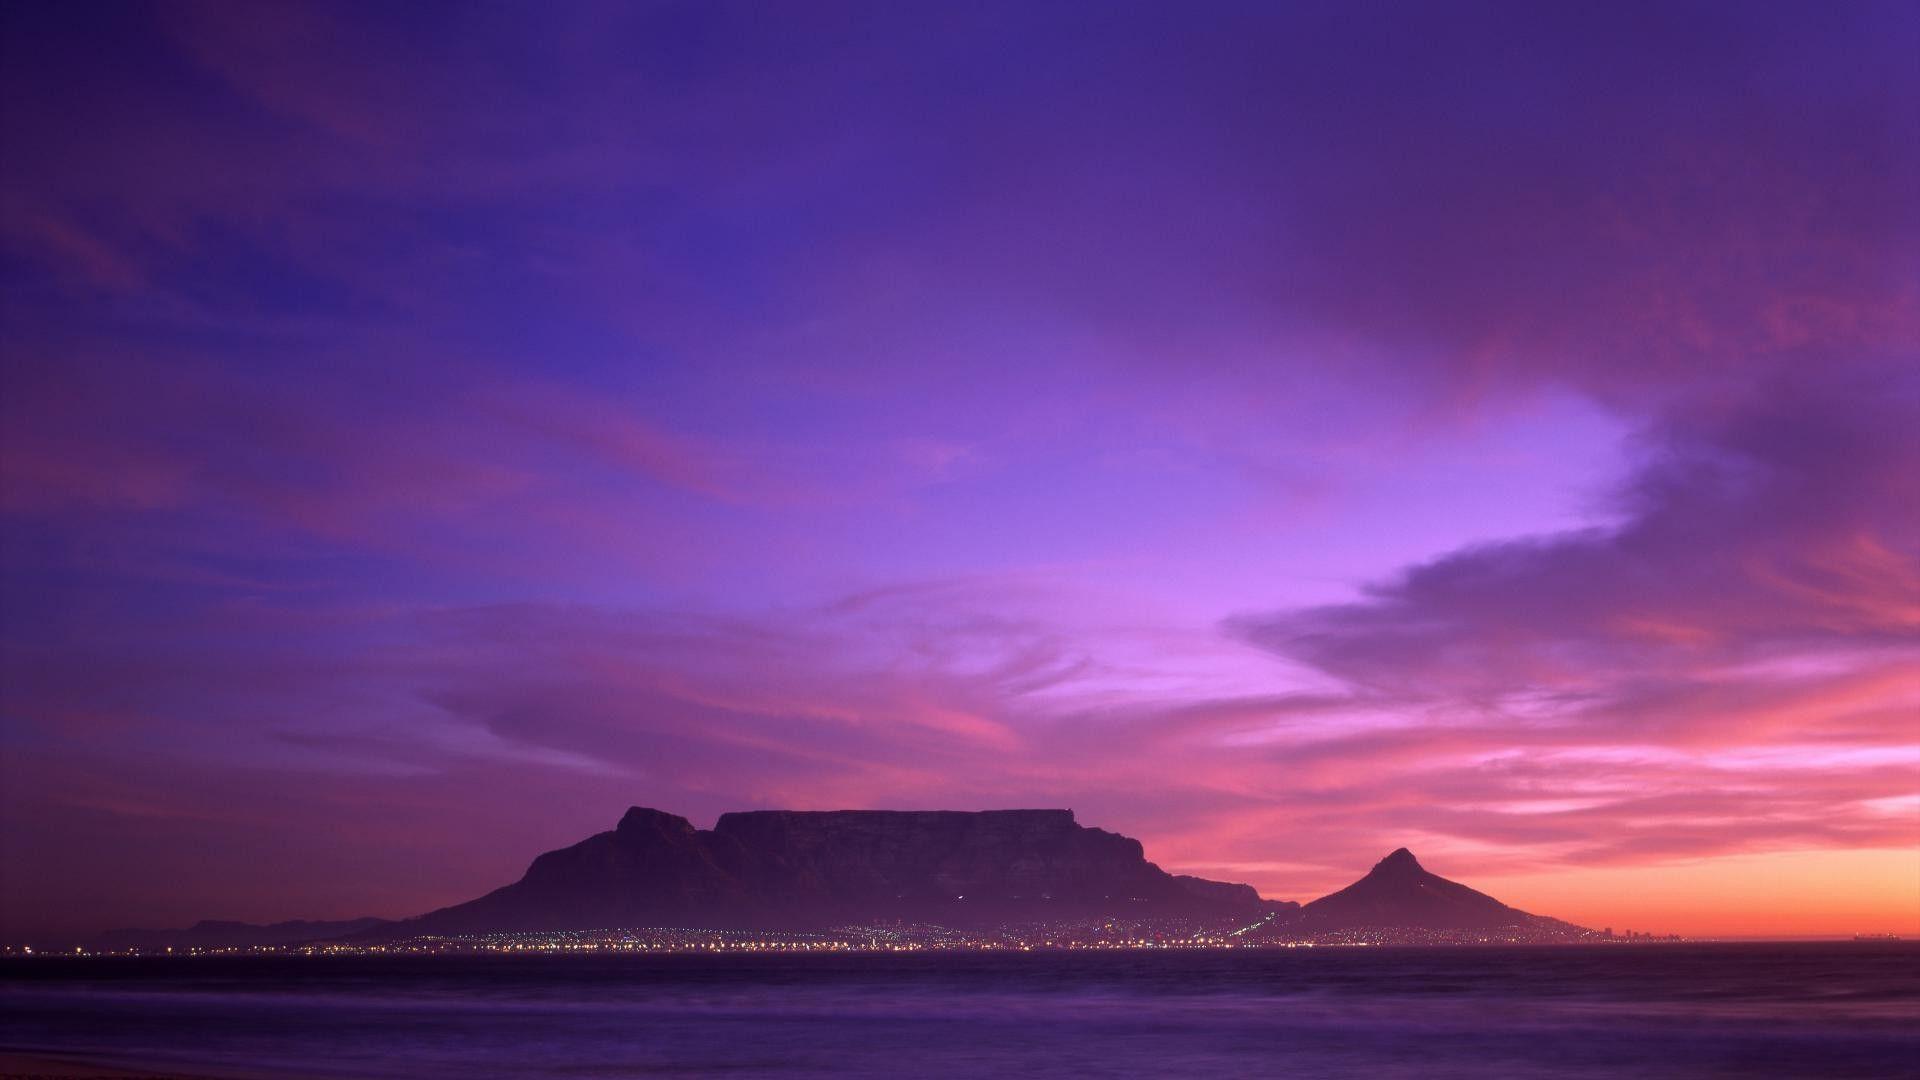 The Image of South Africa Africa 1920x1080 HD Wallpaper